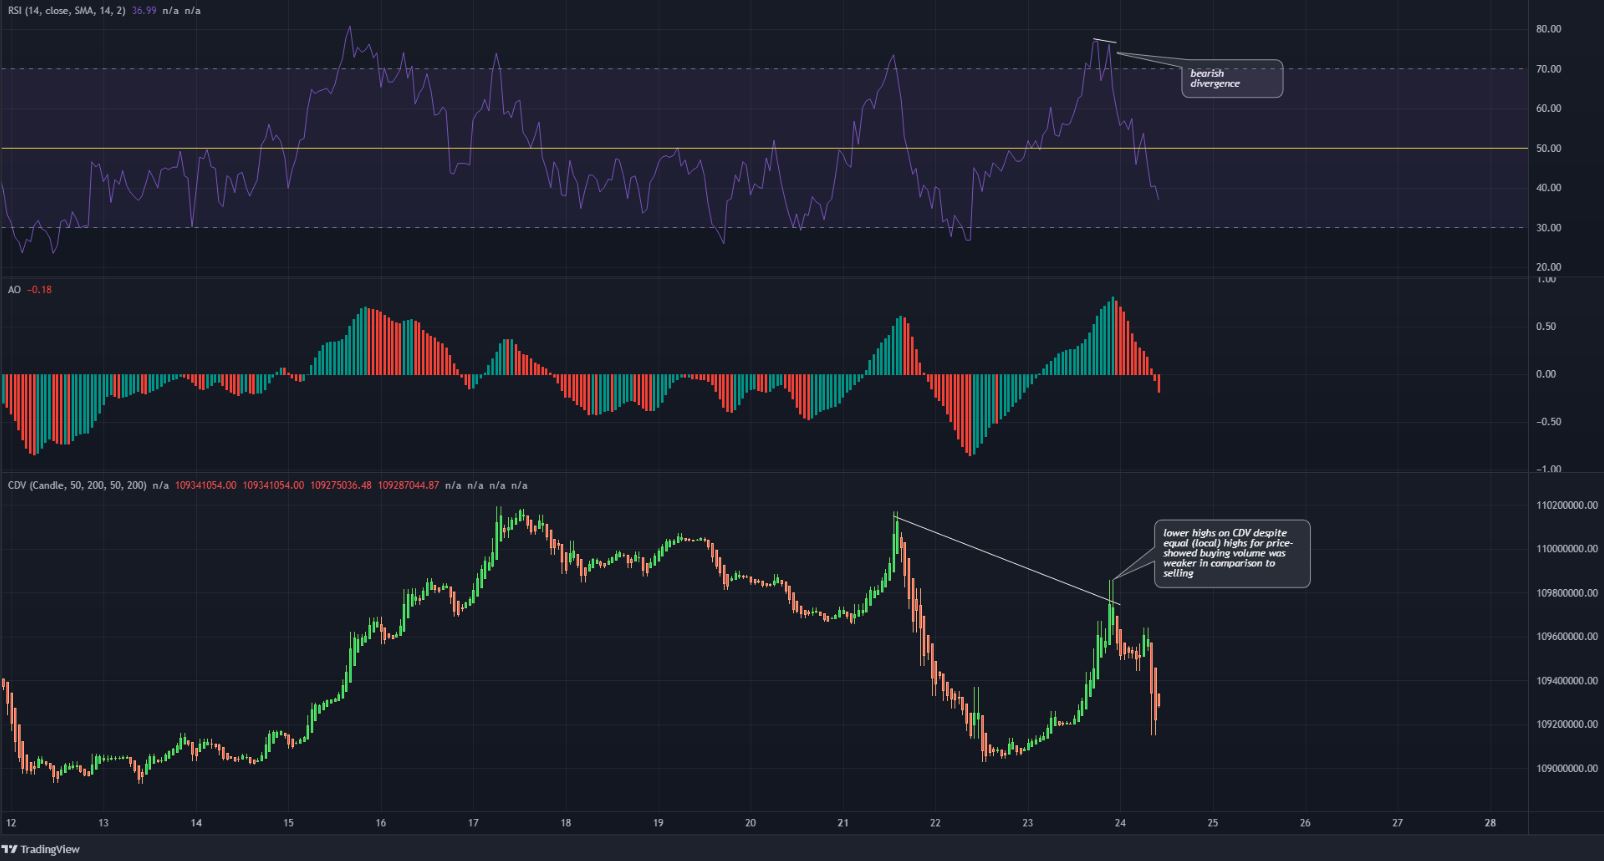 WAVES went tumbling below yet another support level as fear intensified